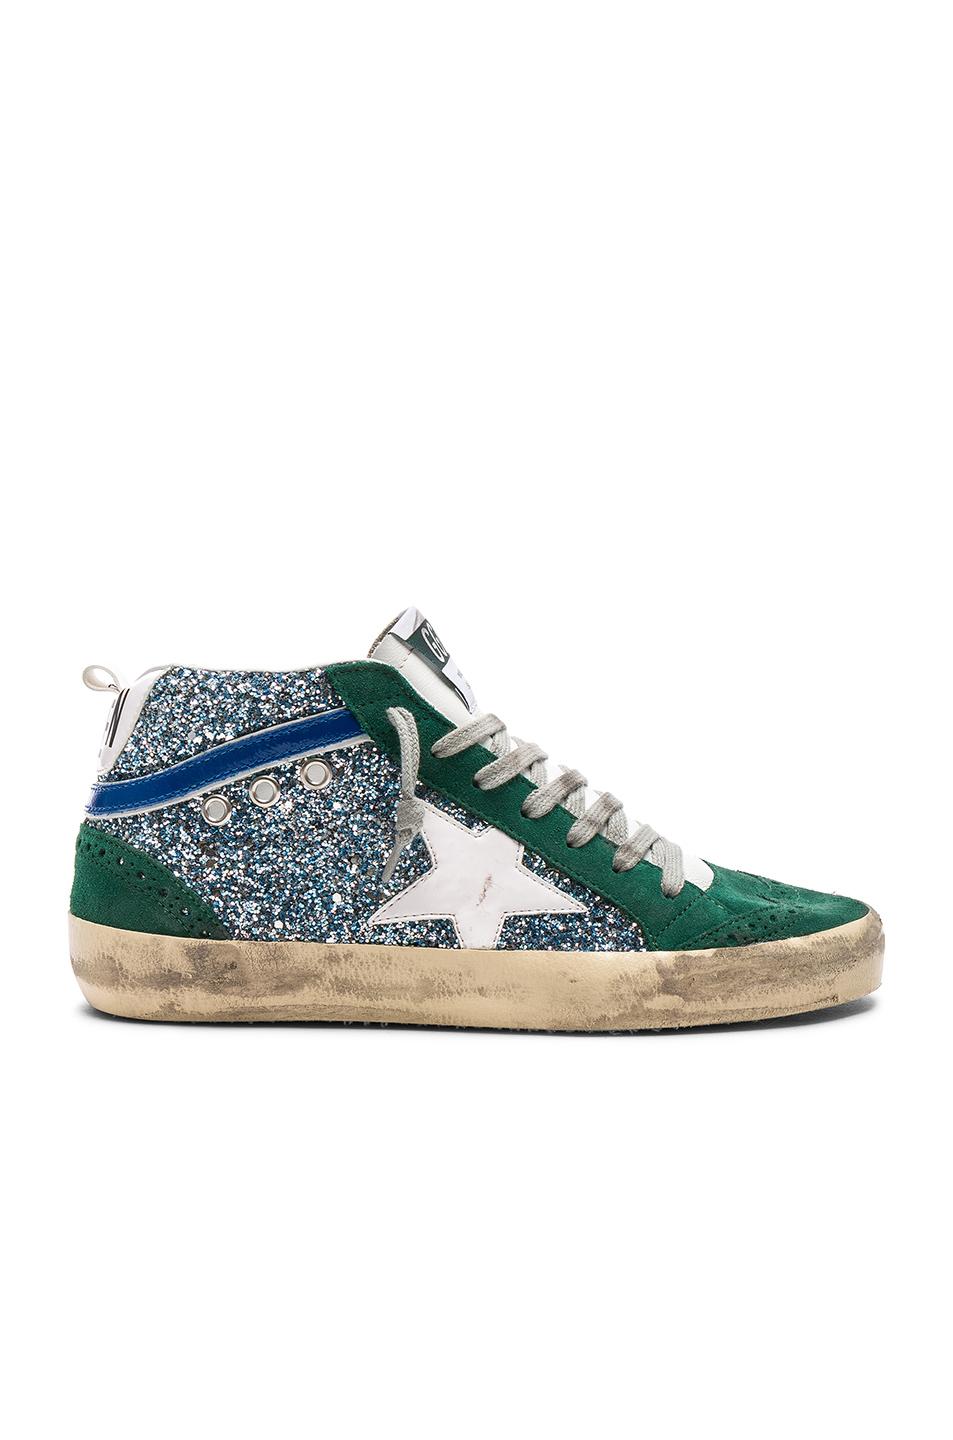 Golden Goose Mid Star Leather, Suede And Glitter Sneakers In Blue,green ...